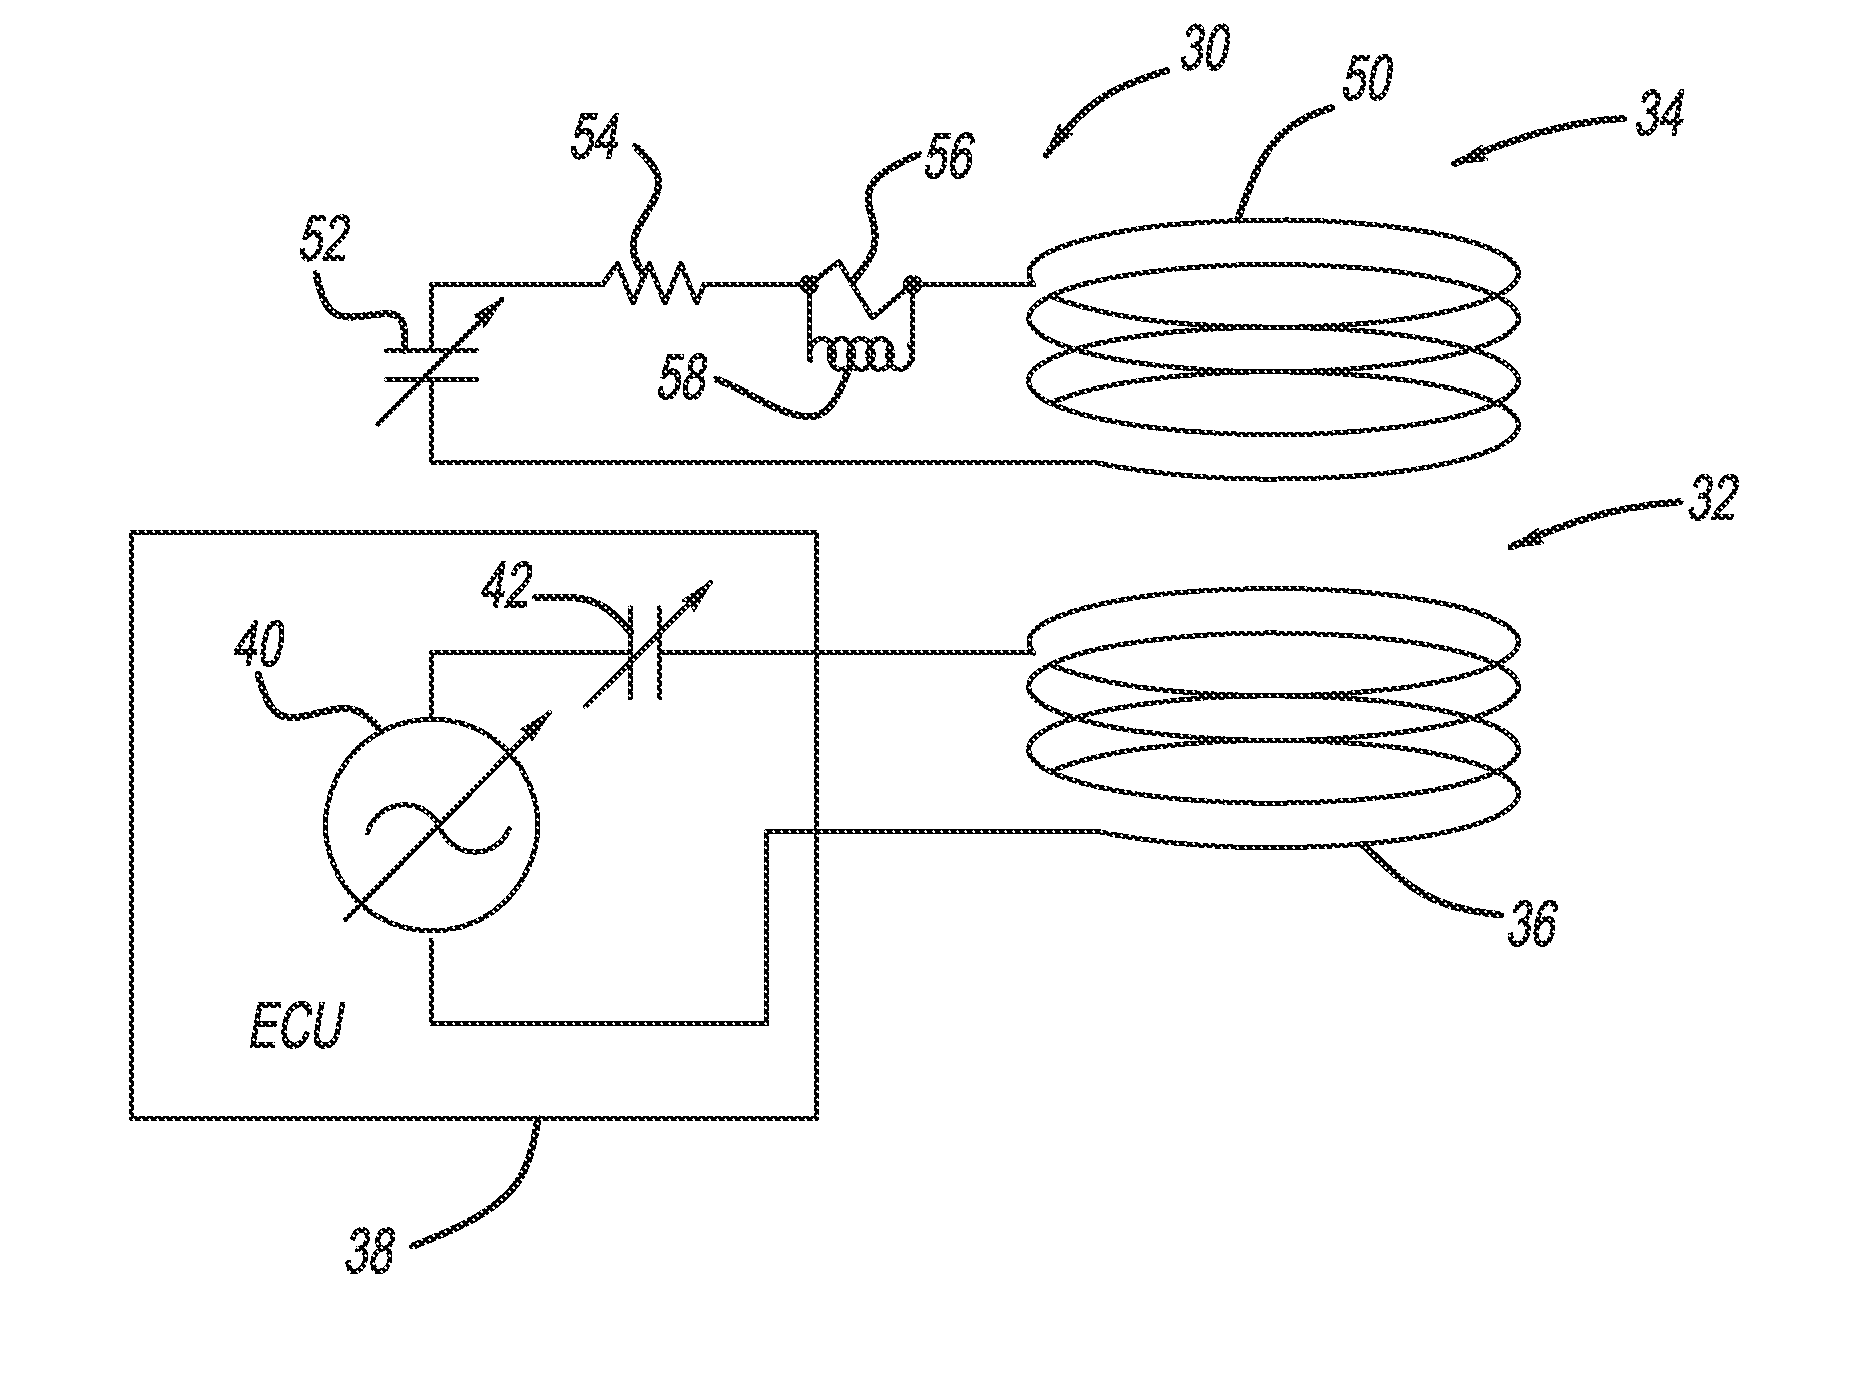 Apparatus for cost effective wireless actuator using sma and mrc